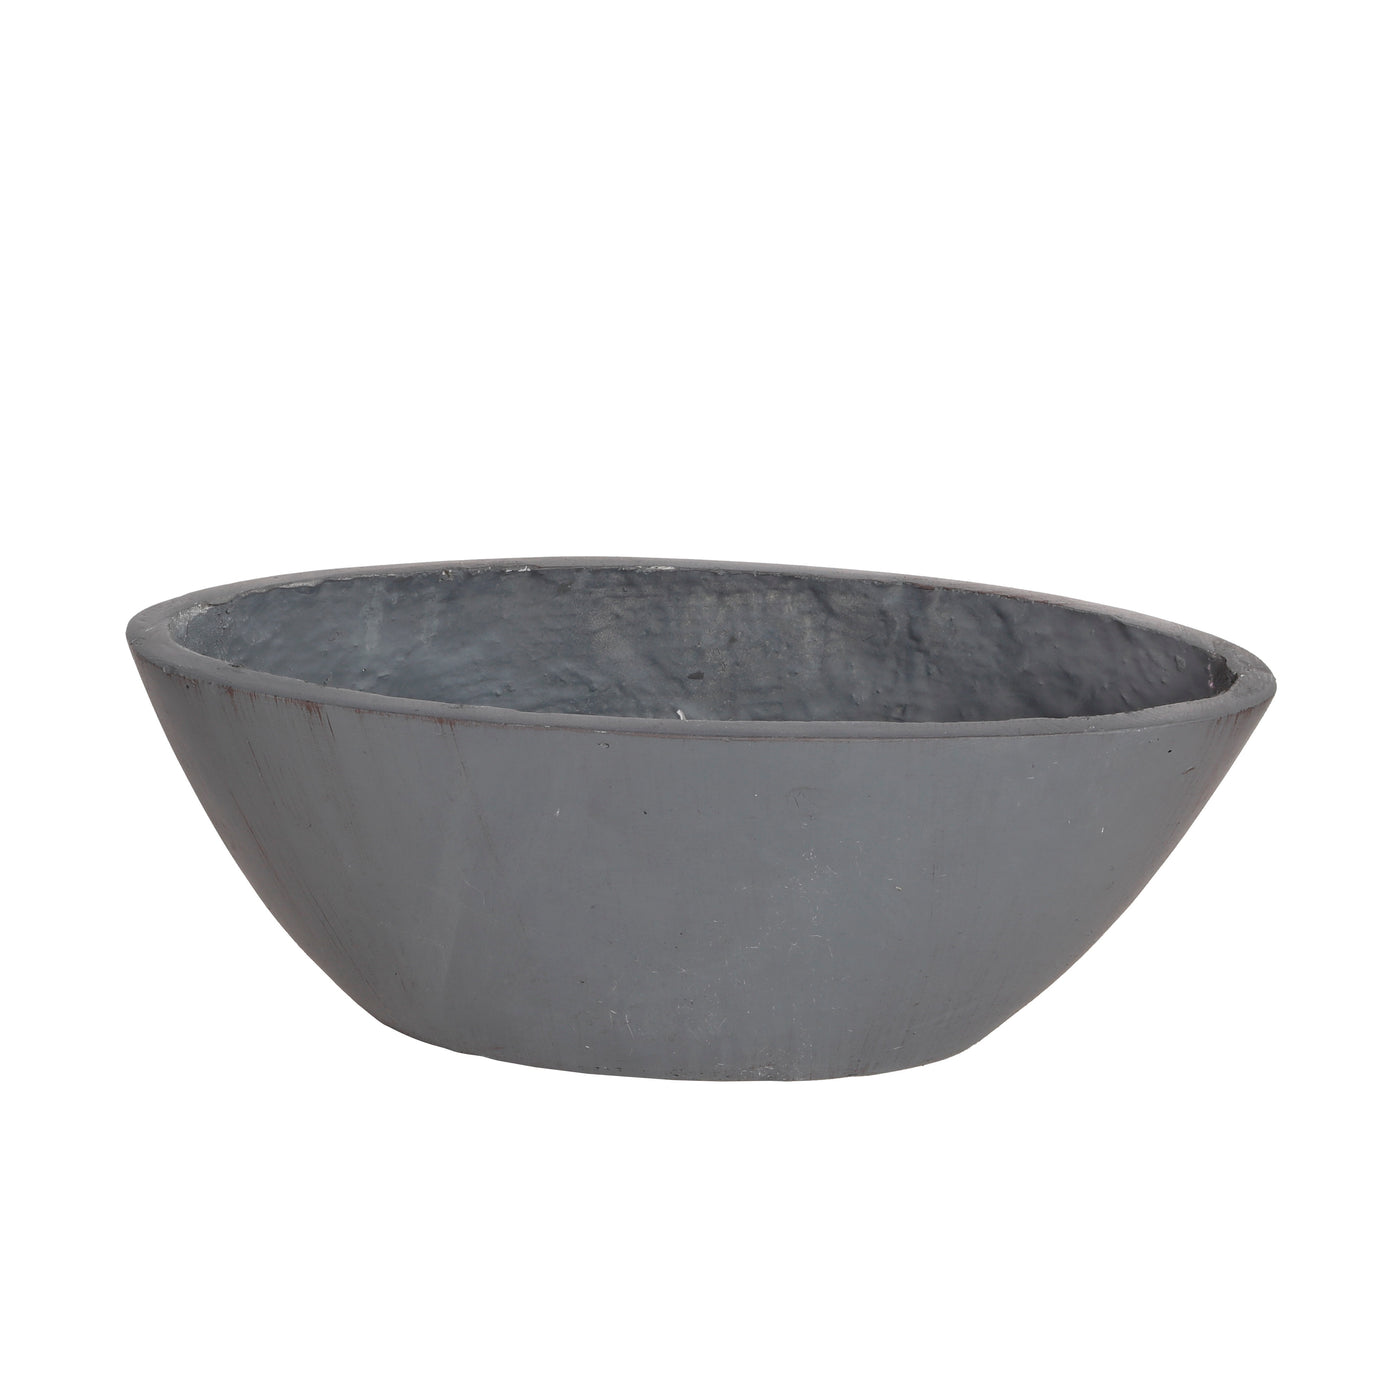 Contemporary oval stonecast planter in charcoal dark gray